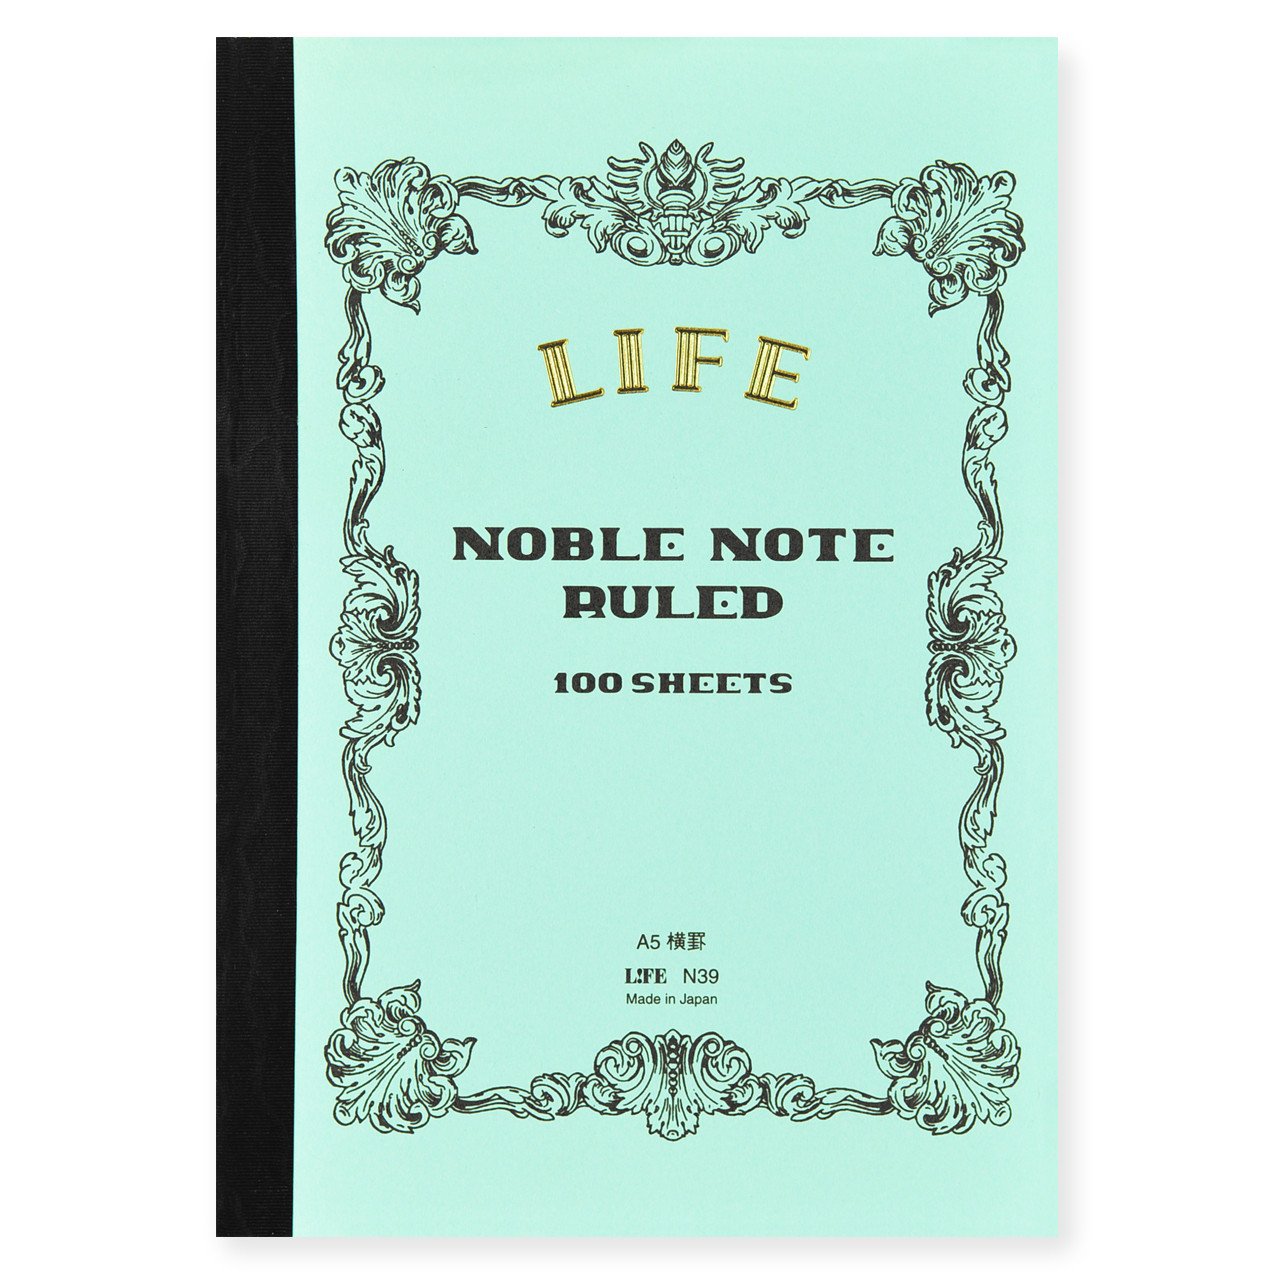 LIFE Stationery Noble Note Ruled Notebook In Four Sizes 